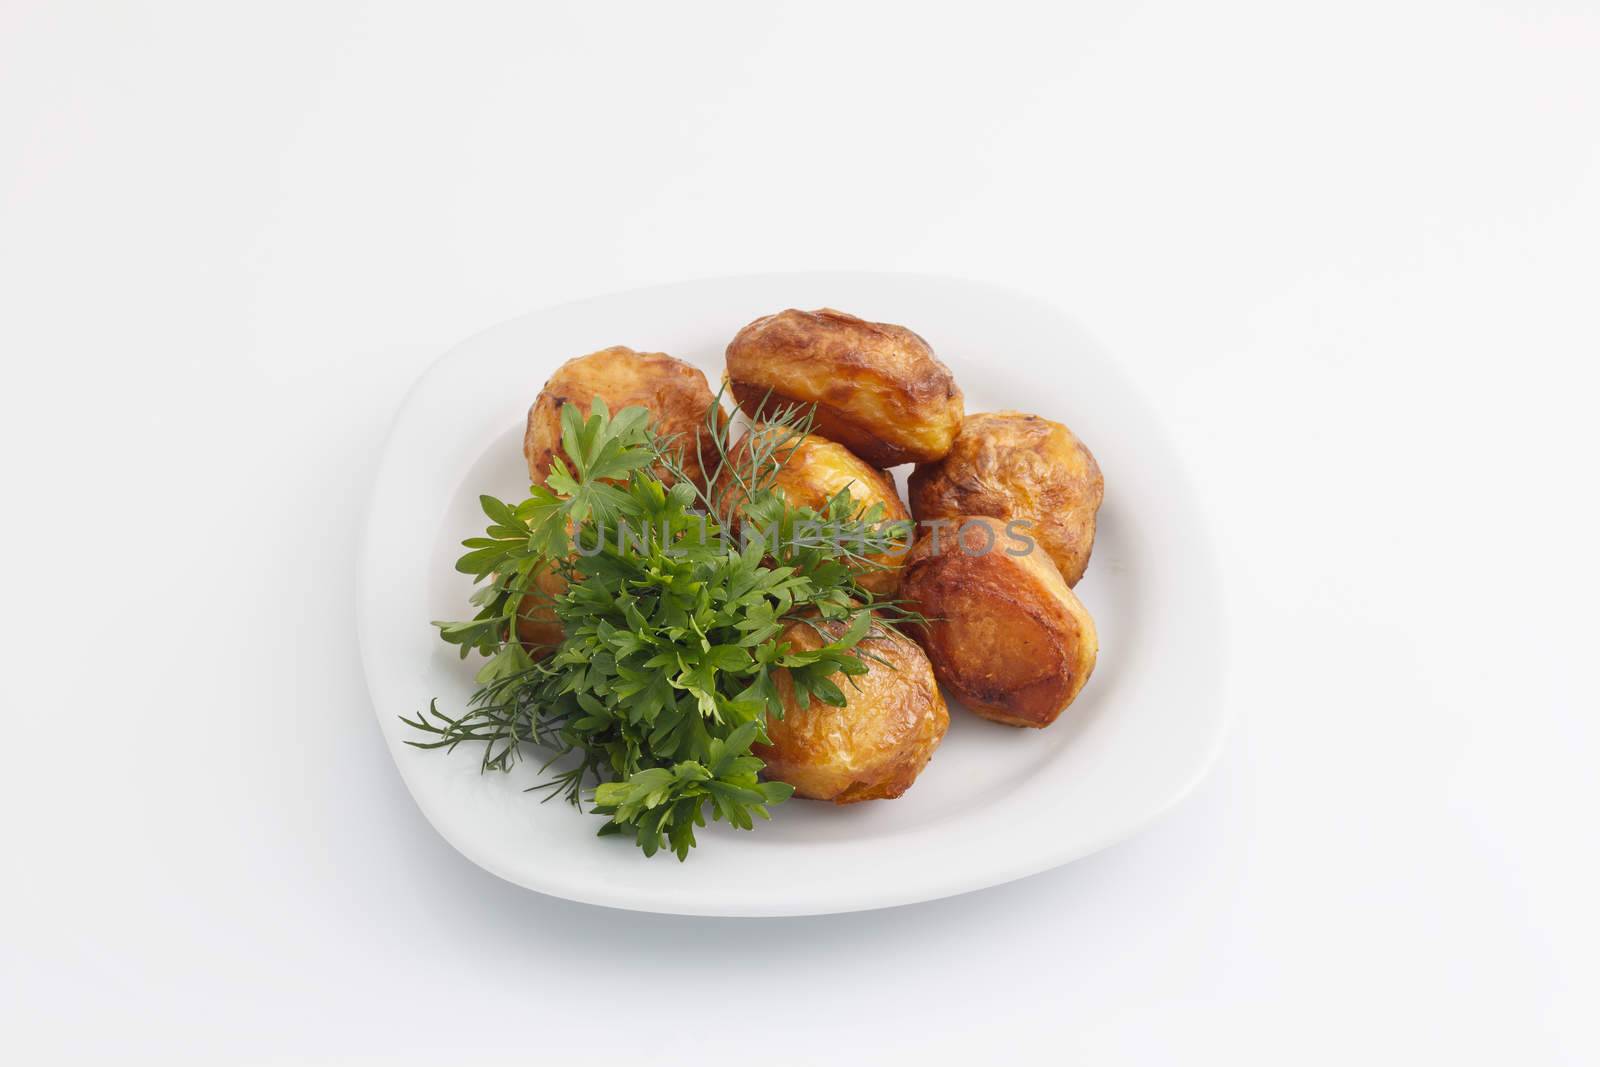 Baked potatoes with dill by fogen